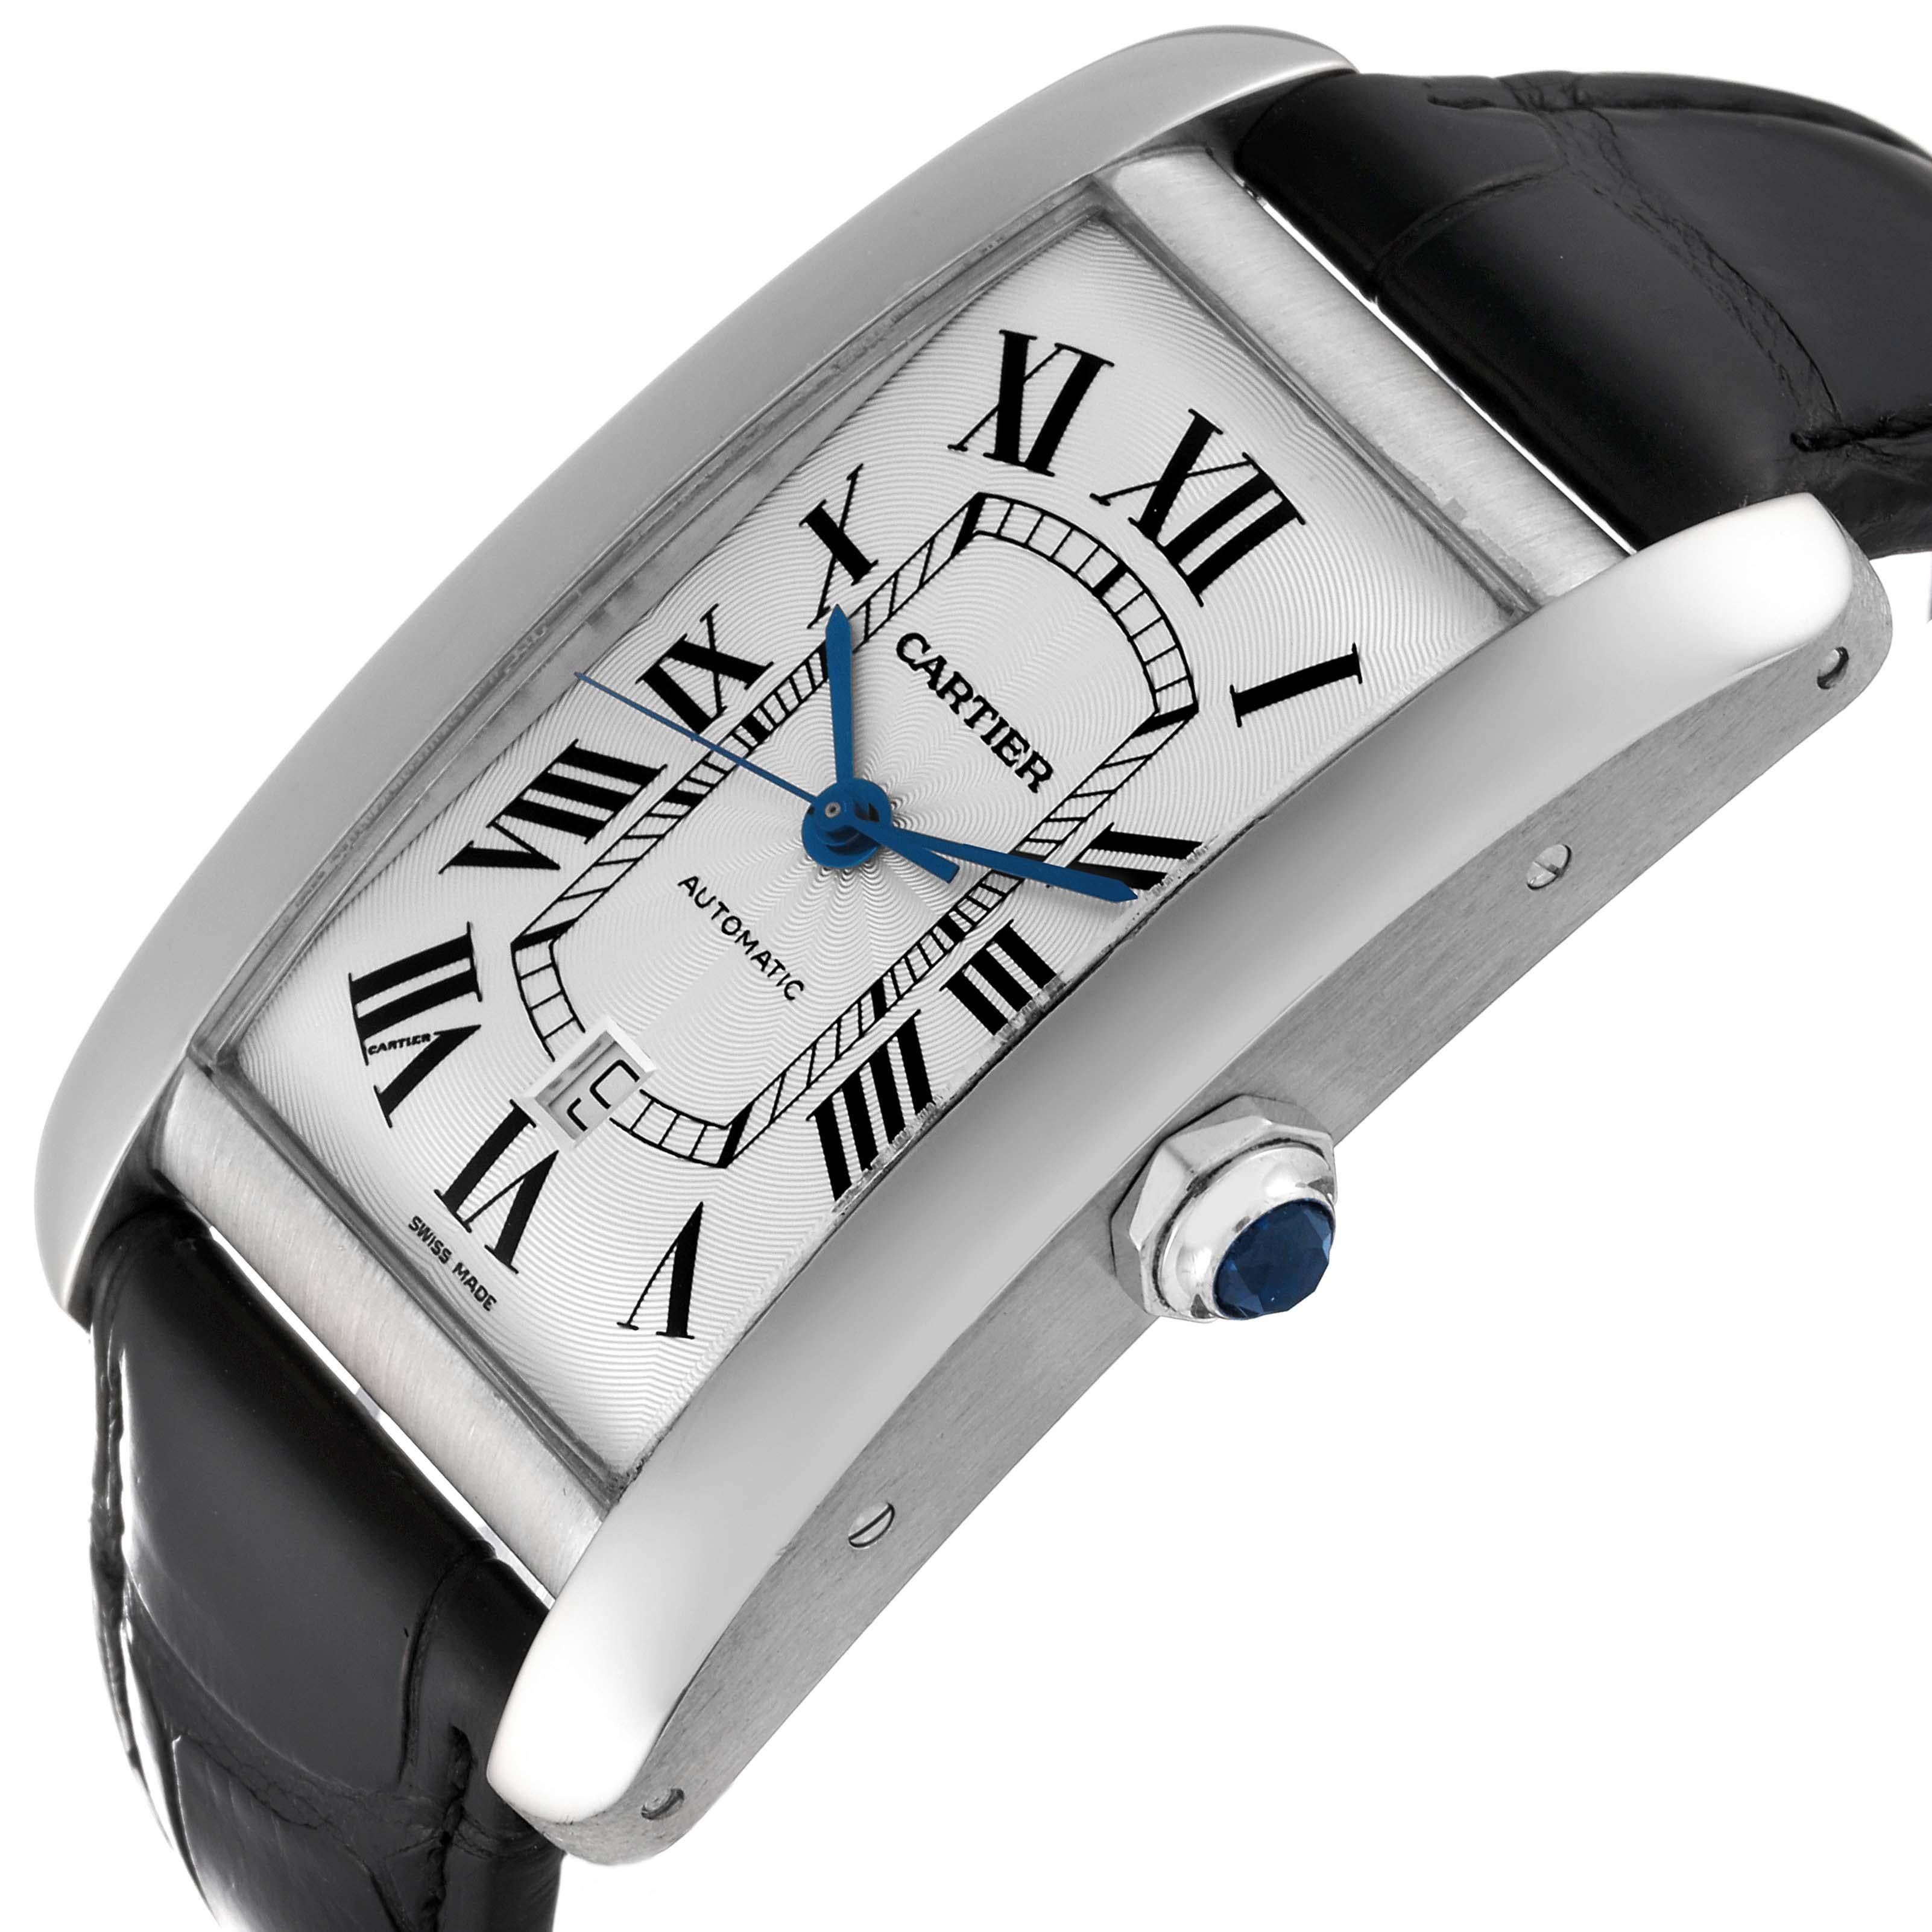 Cartier Tank Americaine XL White Gold Mens Watch W2609956. Automatic self-winding movement. 18K white gold case 31 x 52 mm. Circular grained crown set with faceted blue sapphire. Transparent exhibition sapphire crystal caseback. . Scratch resistant